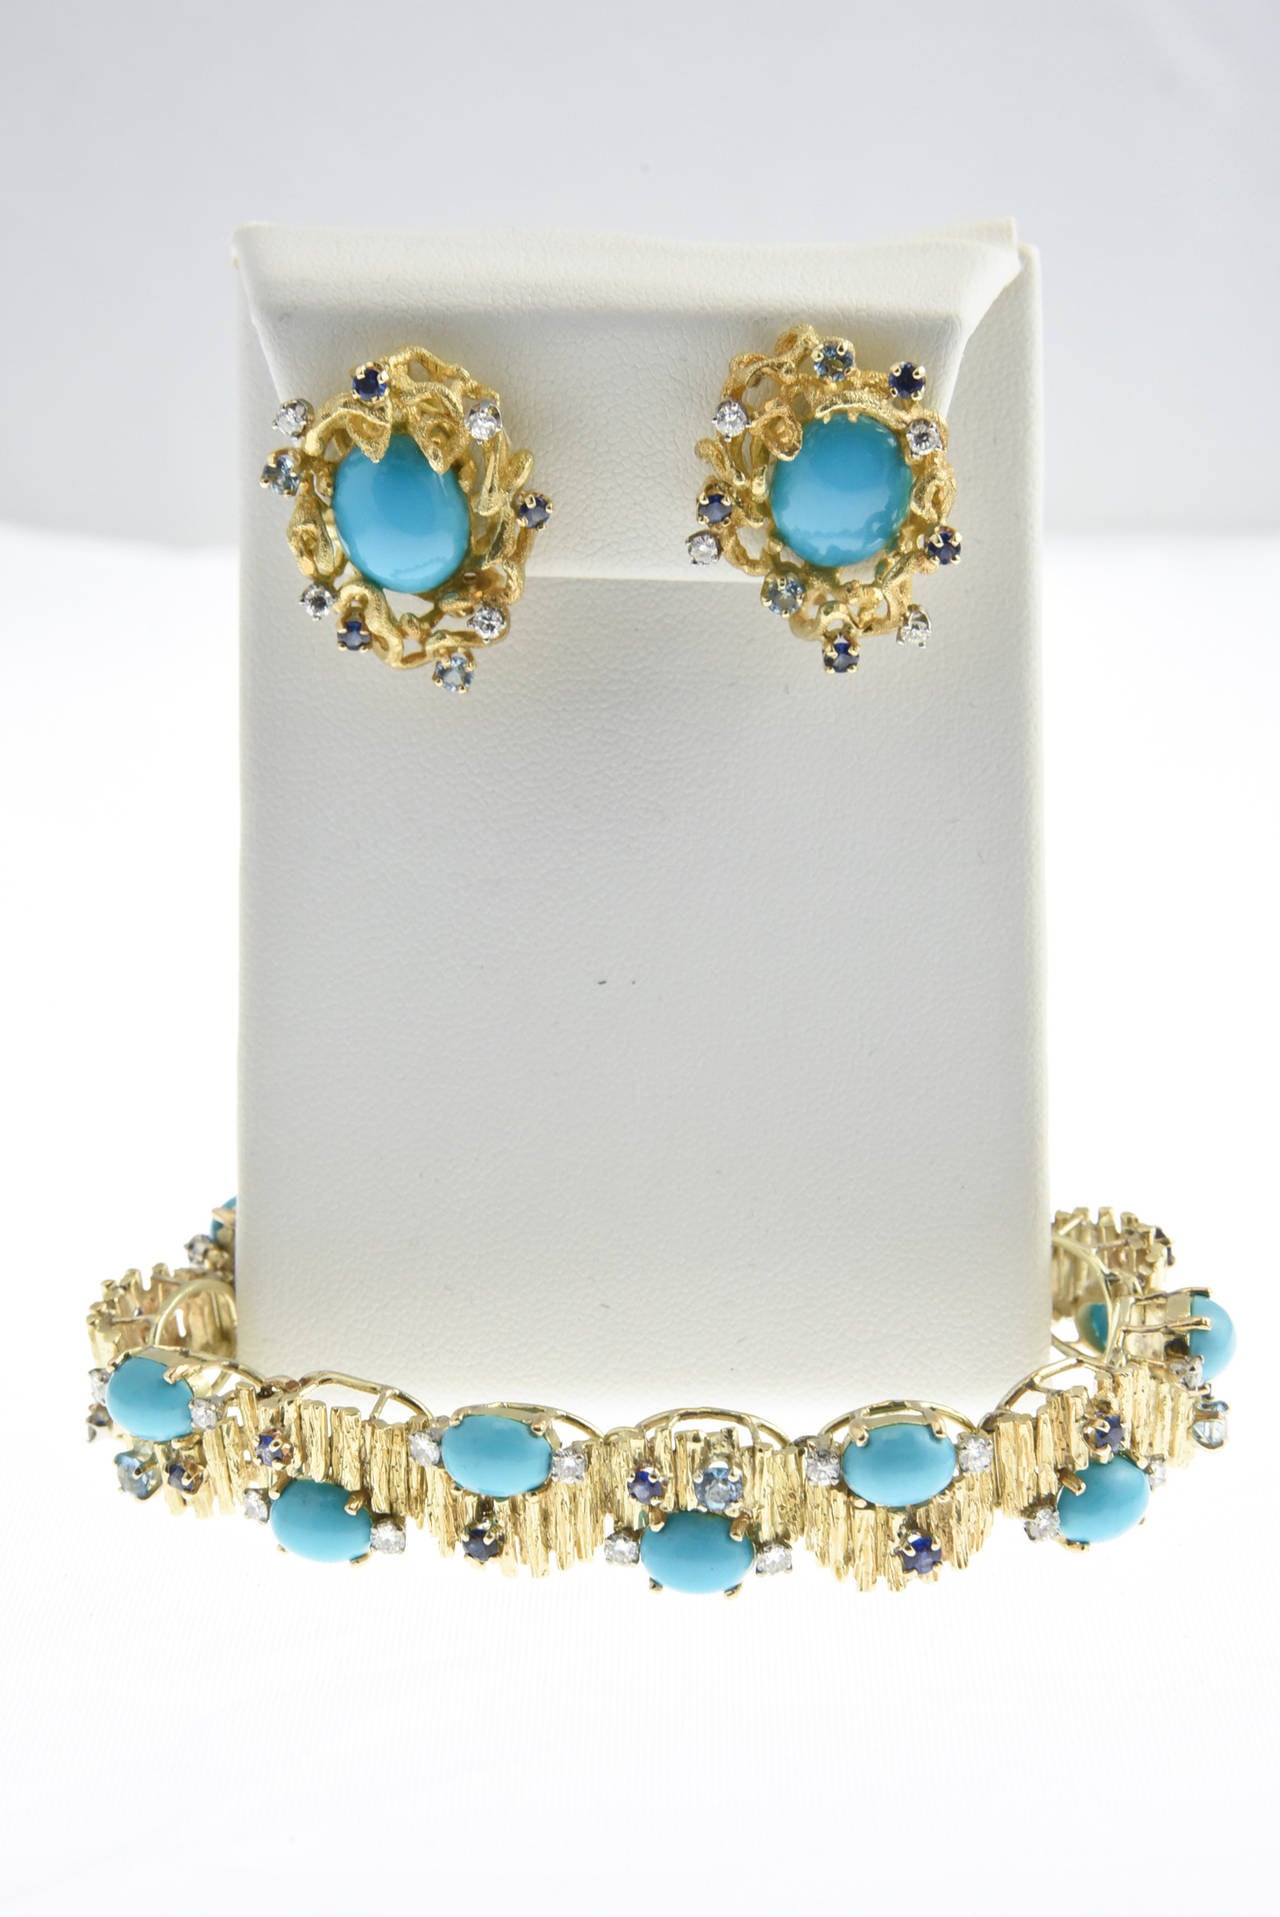 This wonderful 1960's set by Jack Gutschneider includes a bracelet with bark finish links accented by cabochon turquoise pieces and facetted sapphires, blue topaz and diamonds mounted in 14k yellow gold.

The earrings are clips with posts.  They